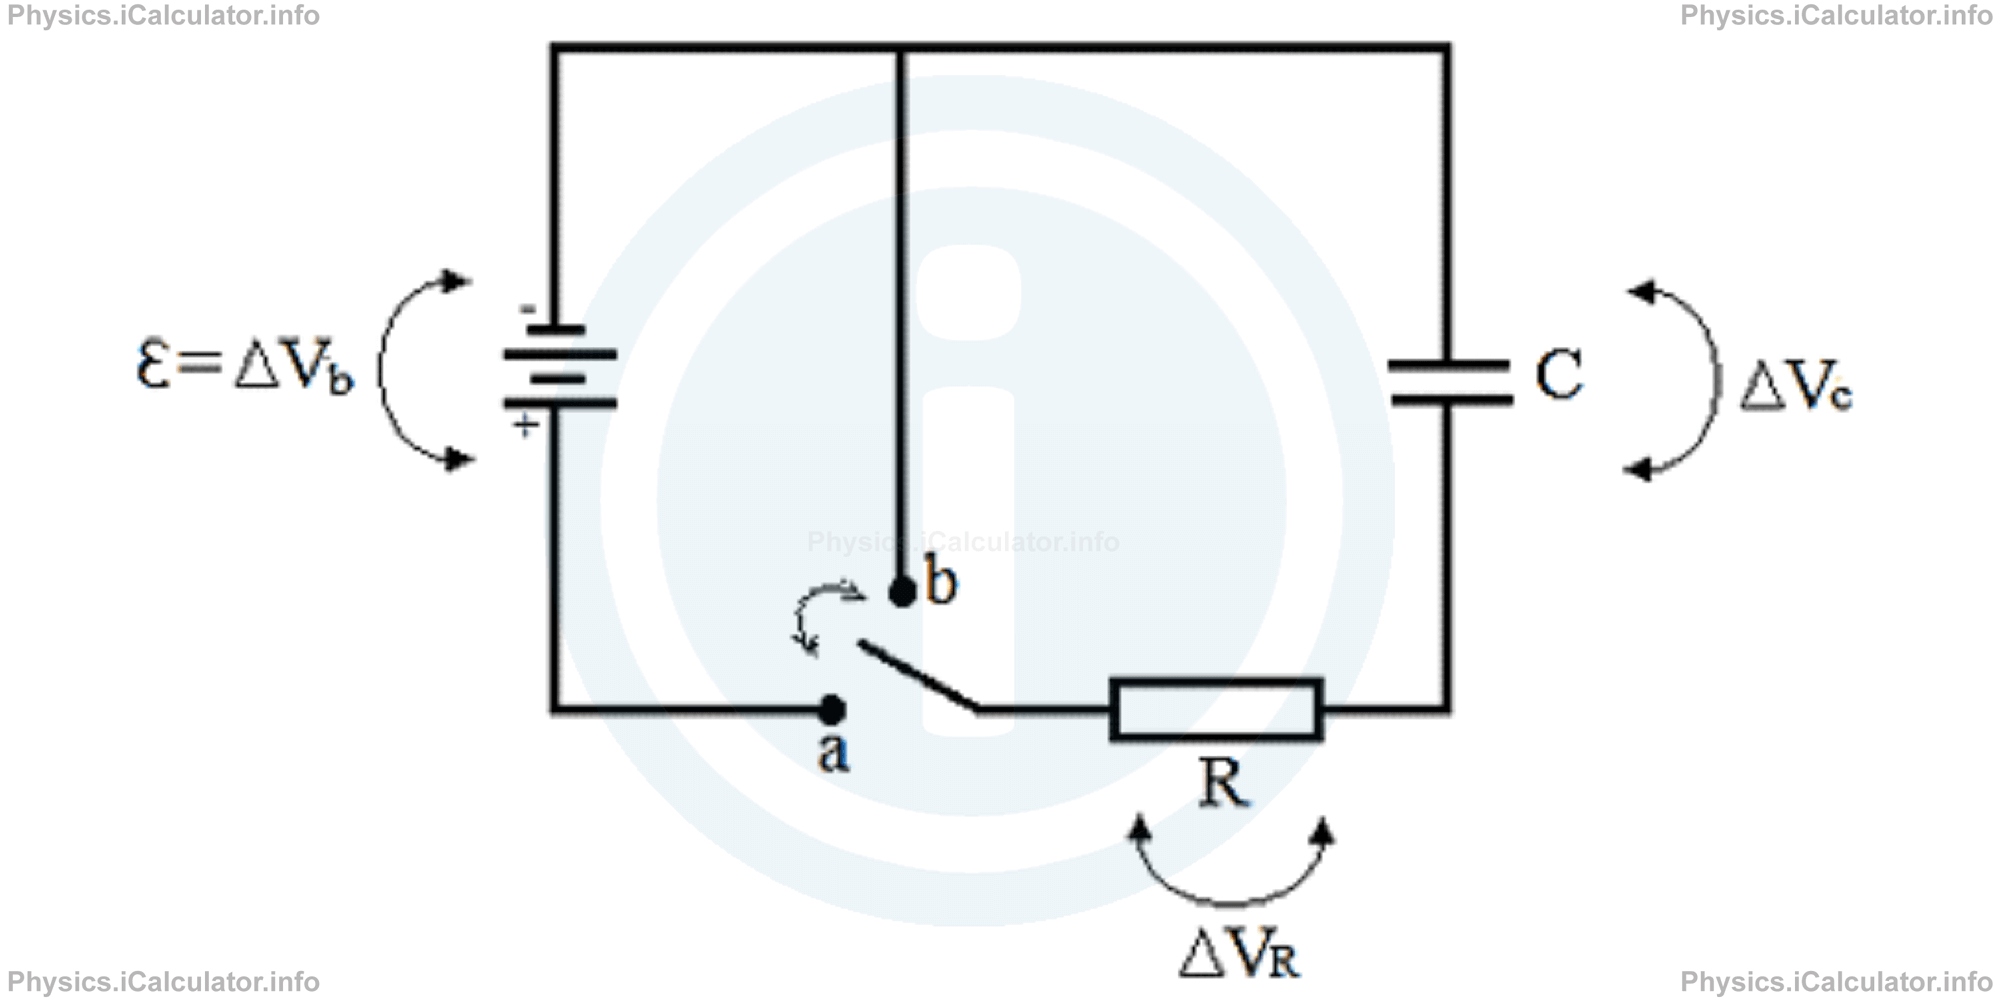 Physics Tutorials: This image provides visual information for the physics tutorial RC Circuits 